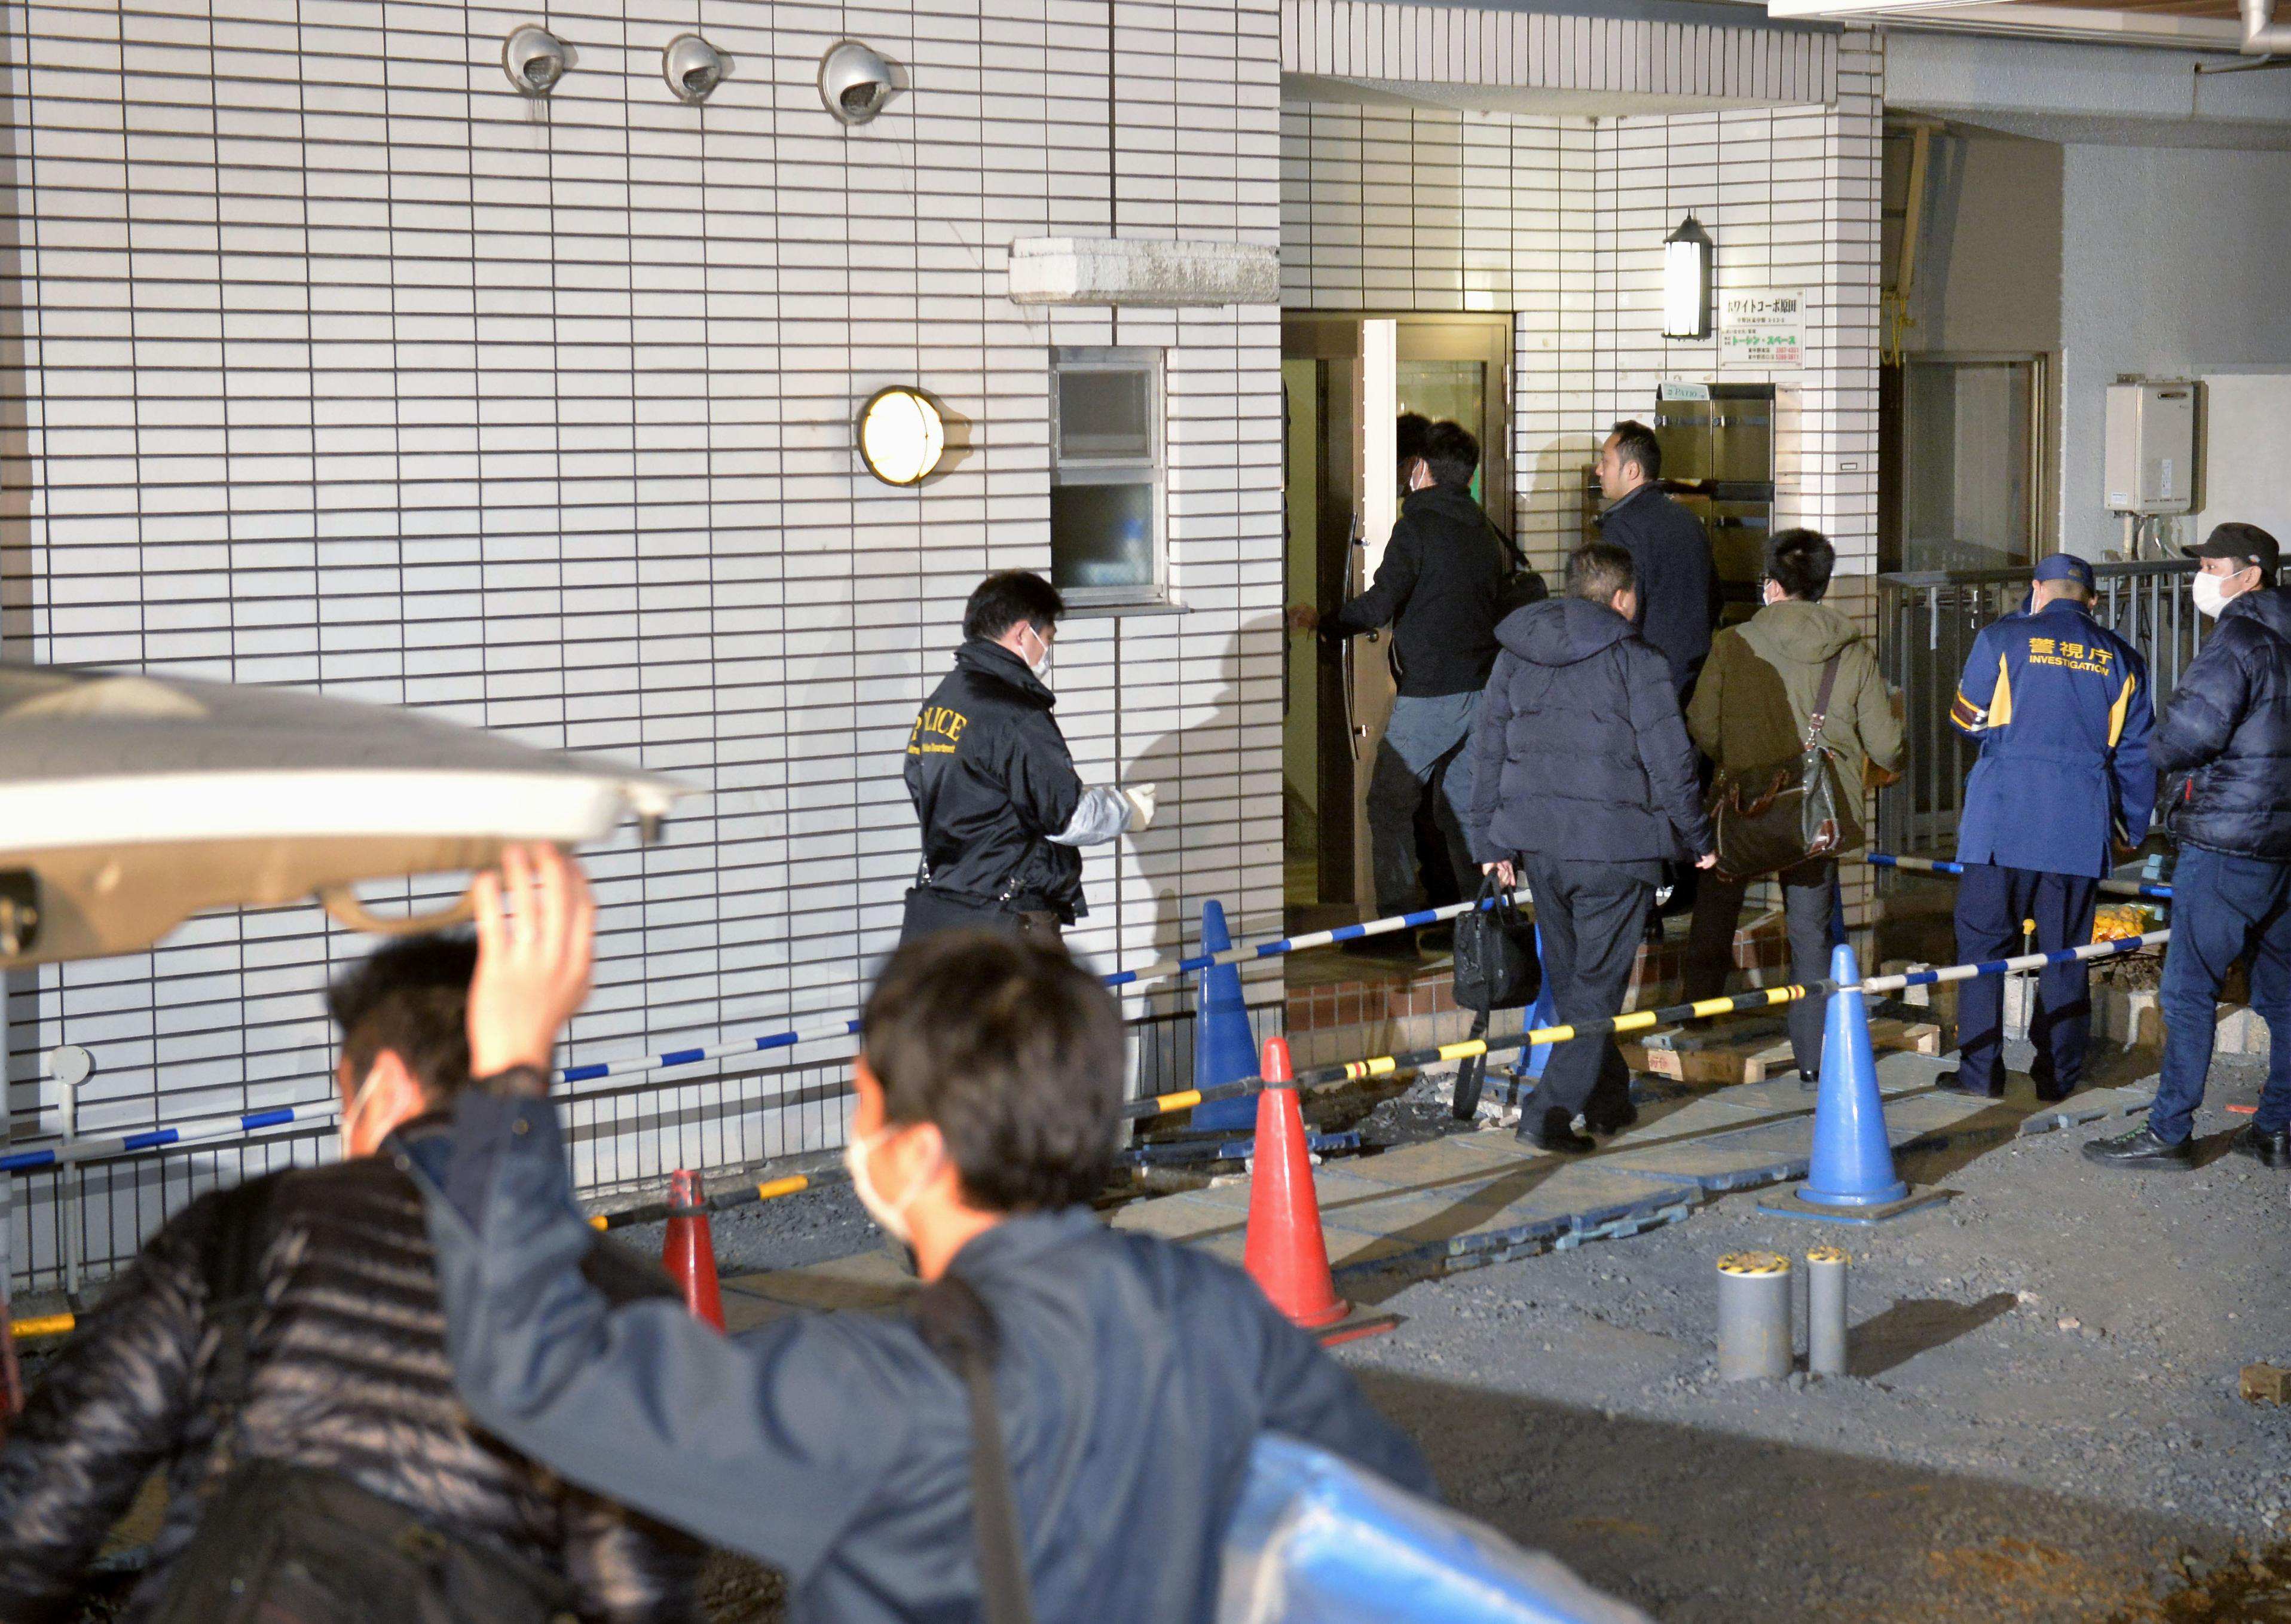 Police officers arrive for investigation of the apartment of abduction suspect Kabu Terauchi in Tokyo on March 28, 2016. (Kyodo News/AP)